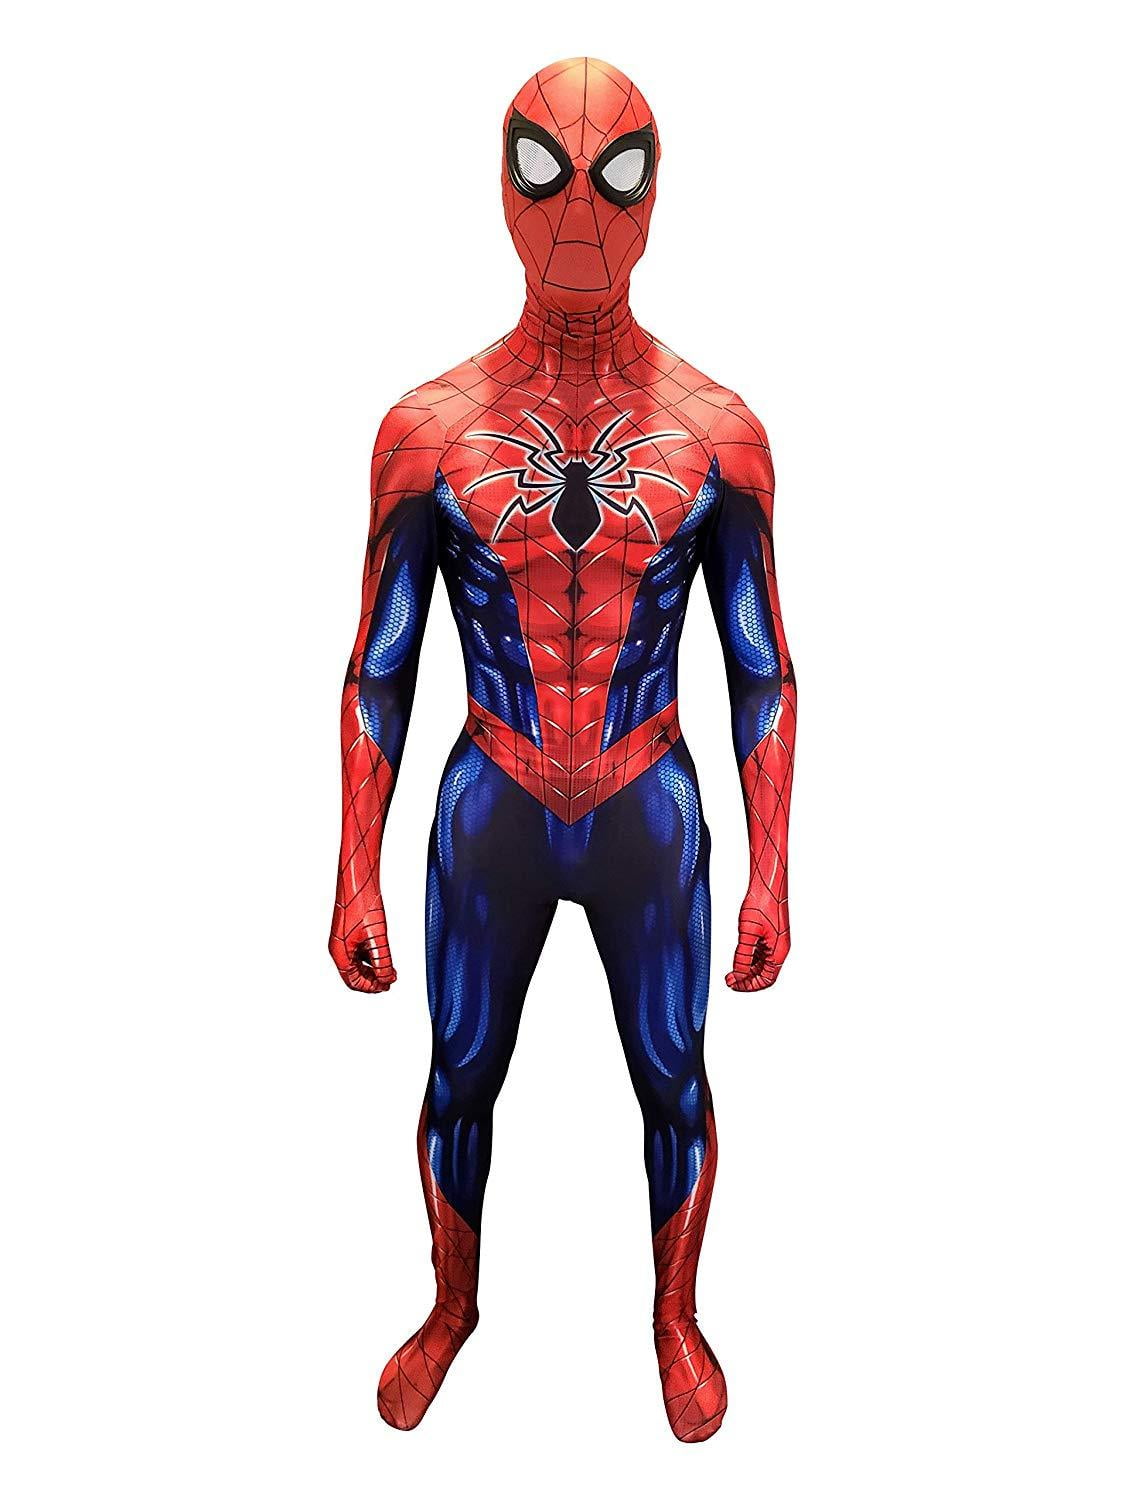 Spiderman ps4 Suits Cosplay Costume Jumpsuit Mask Bodysuit Spider Man New 2018 